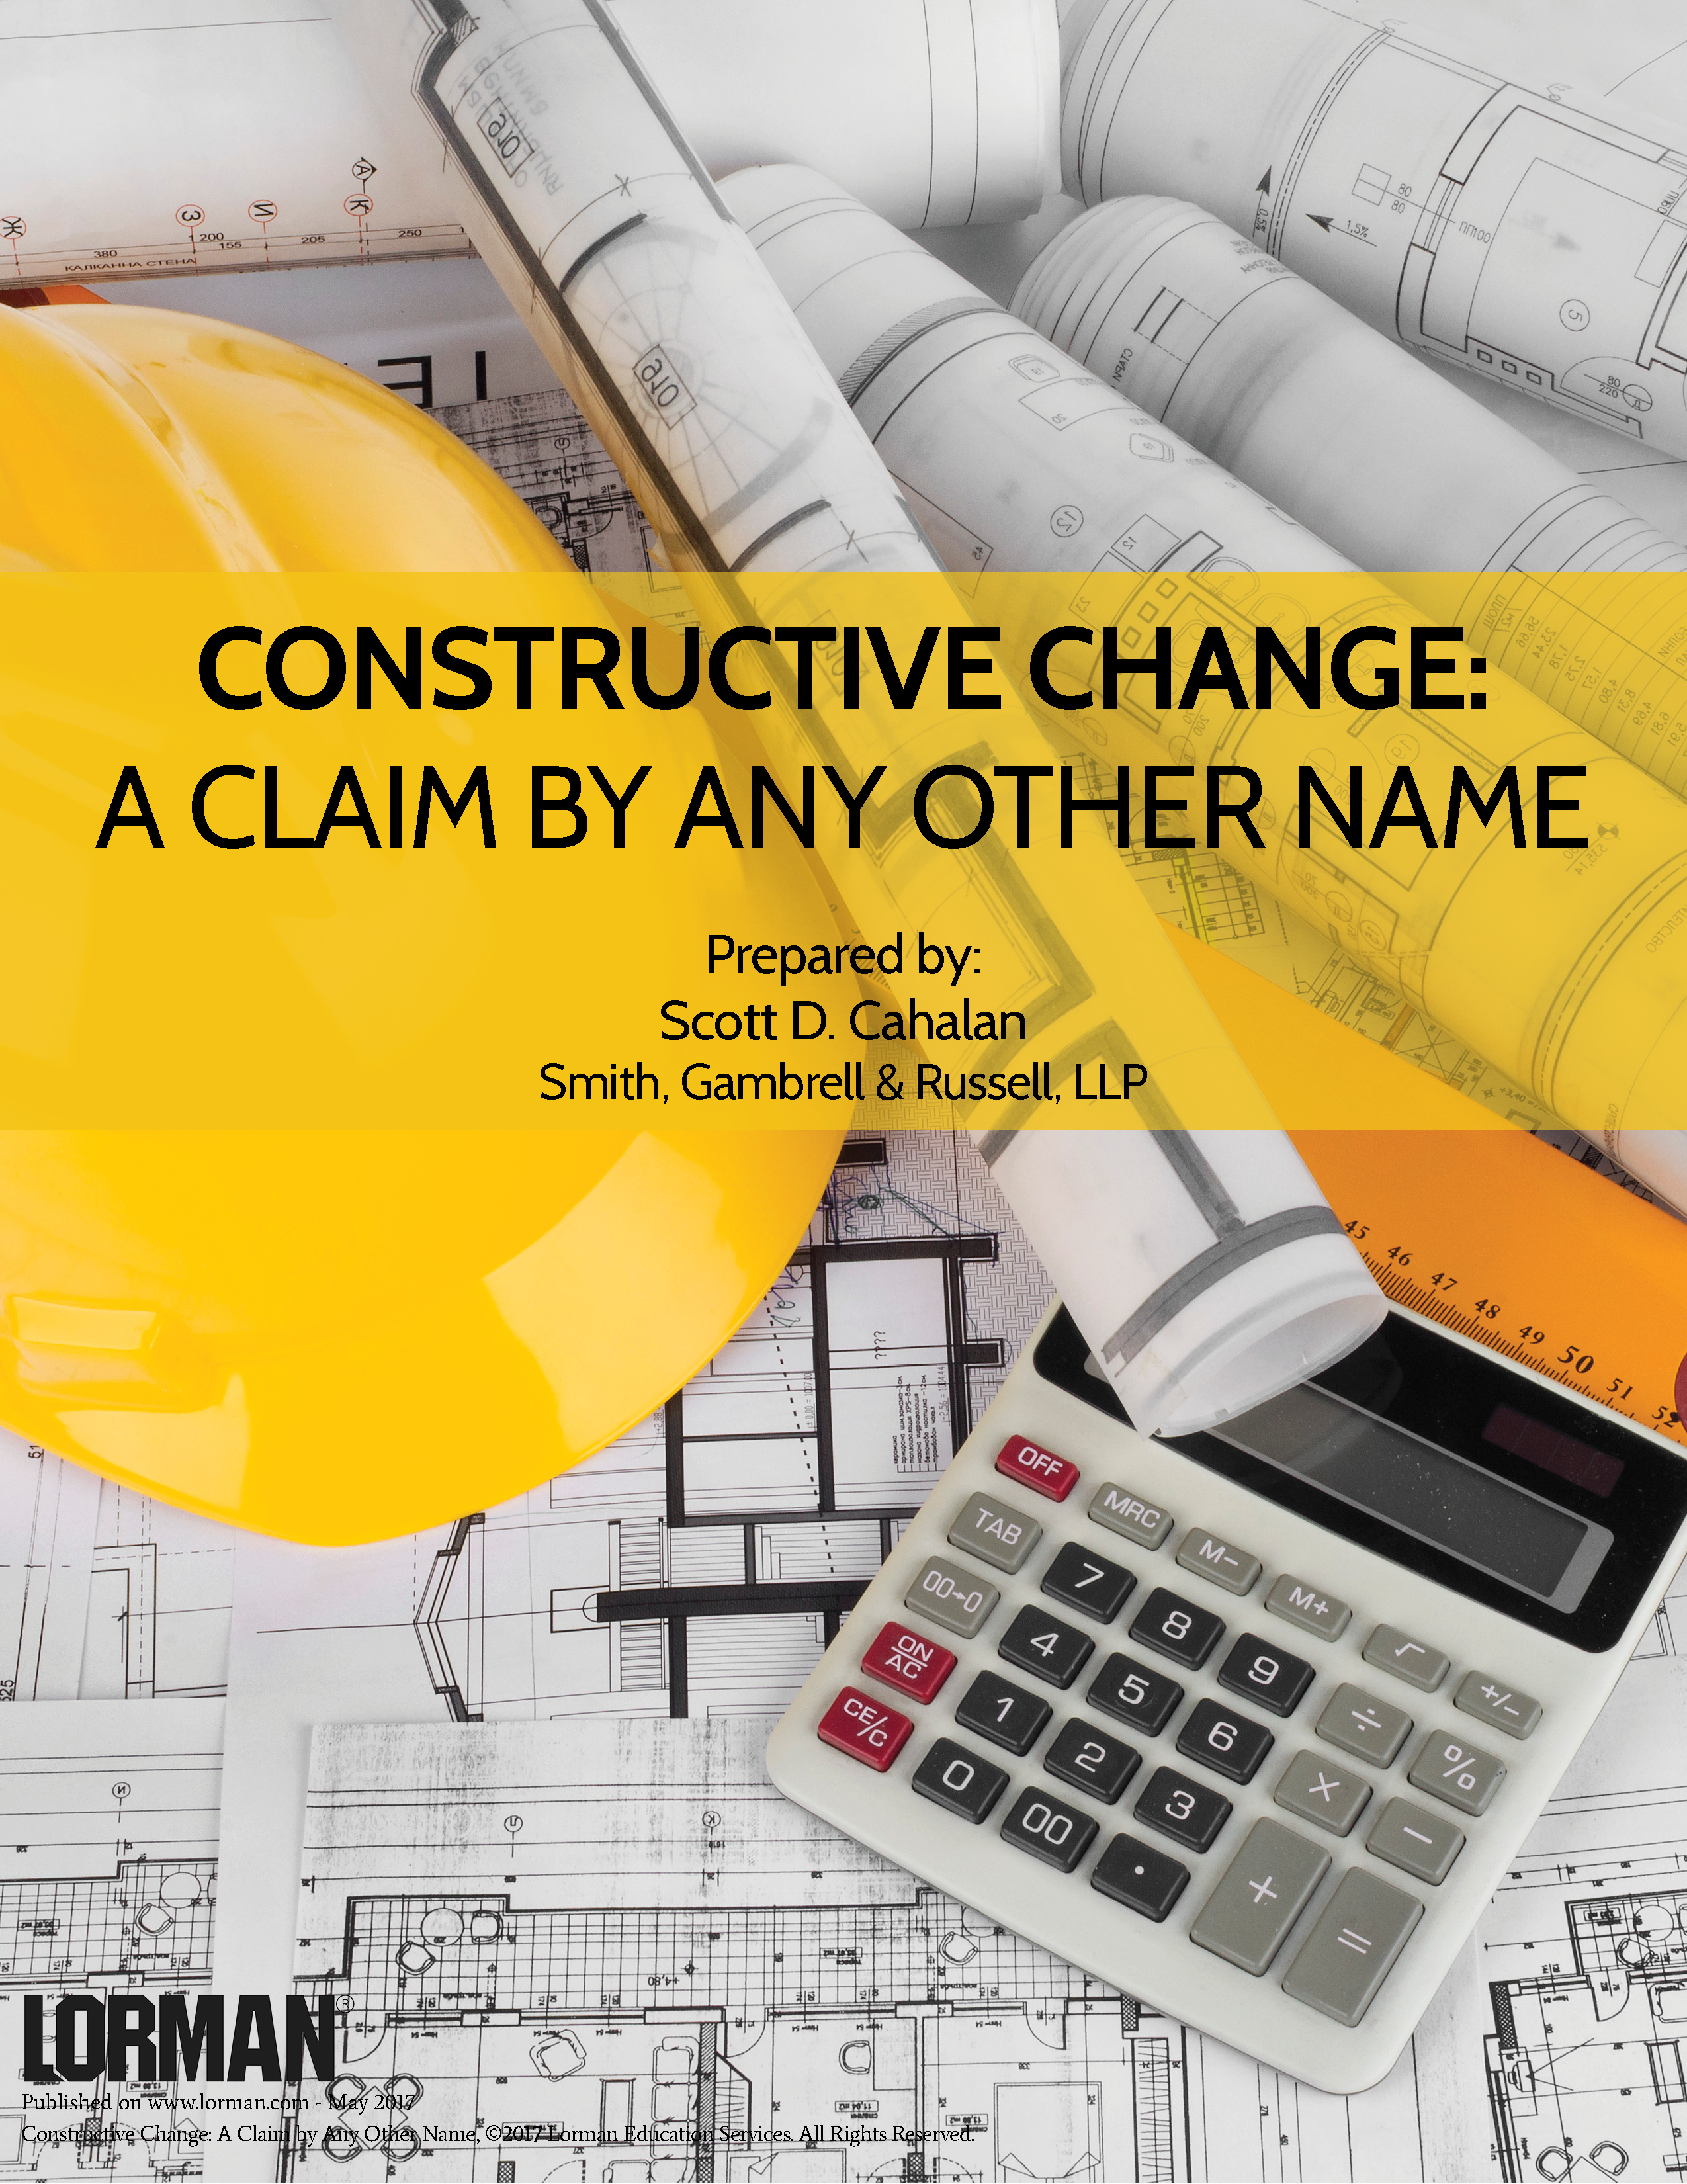 Constructive Change: A Claim by Any Other Name